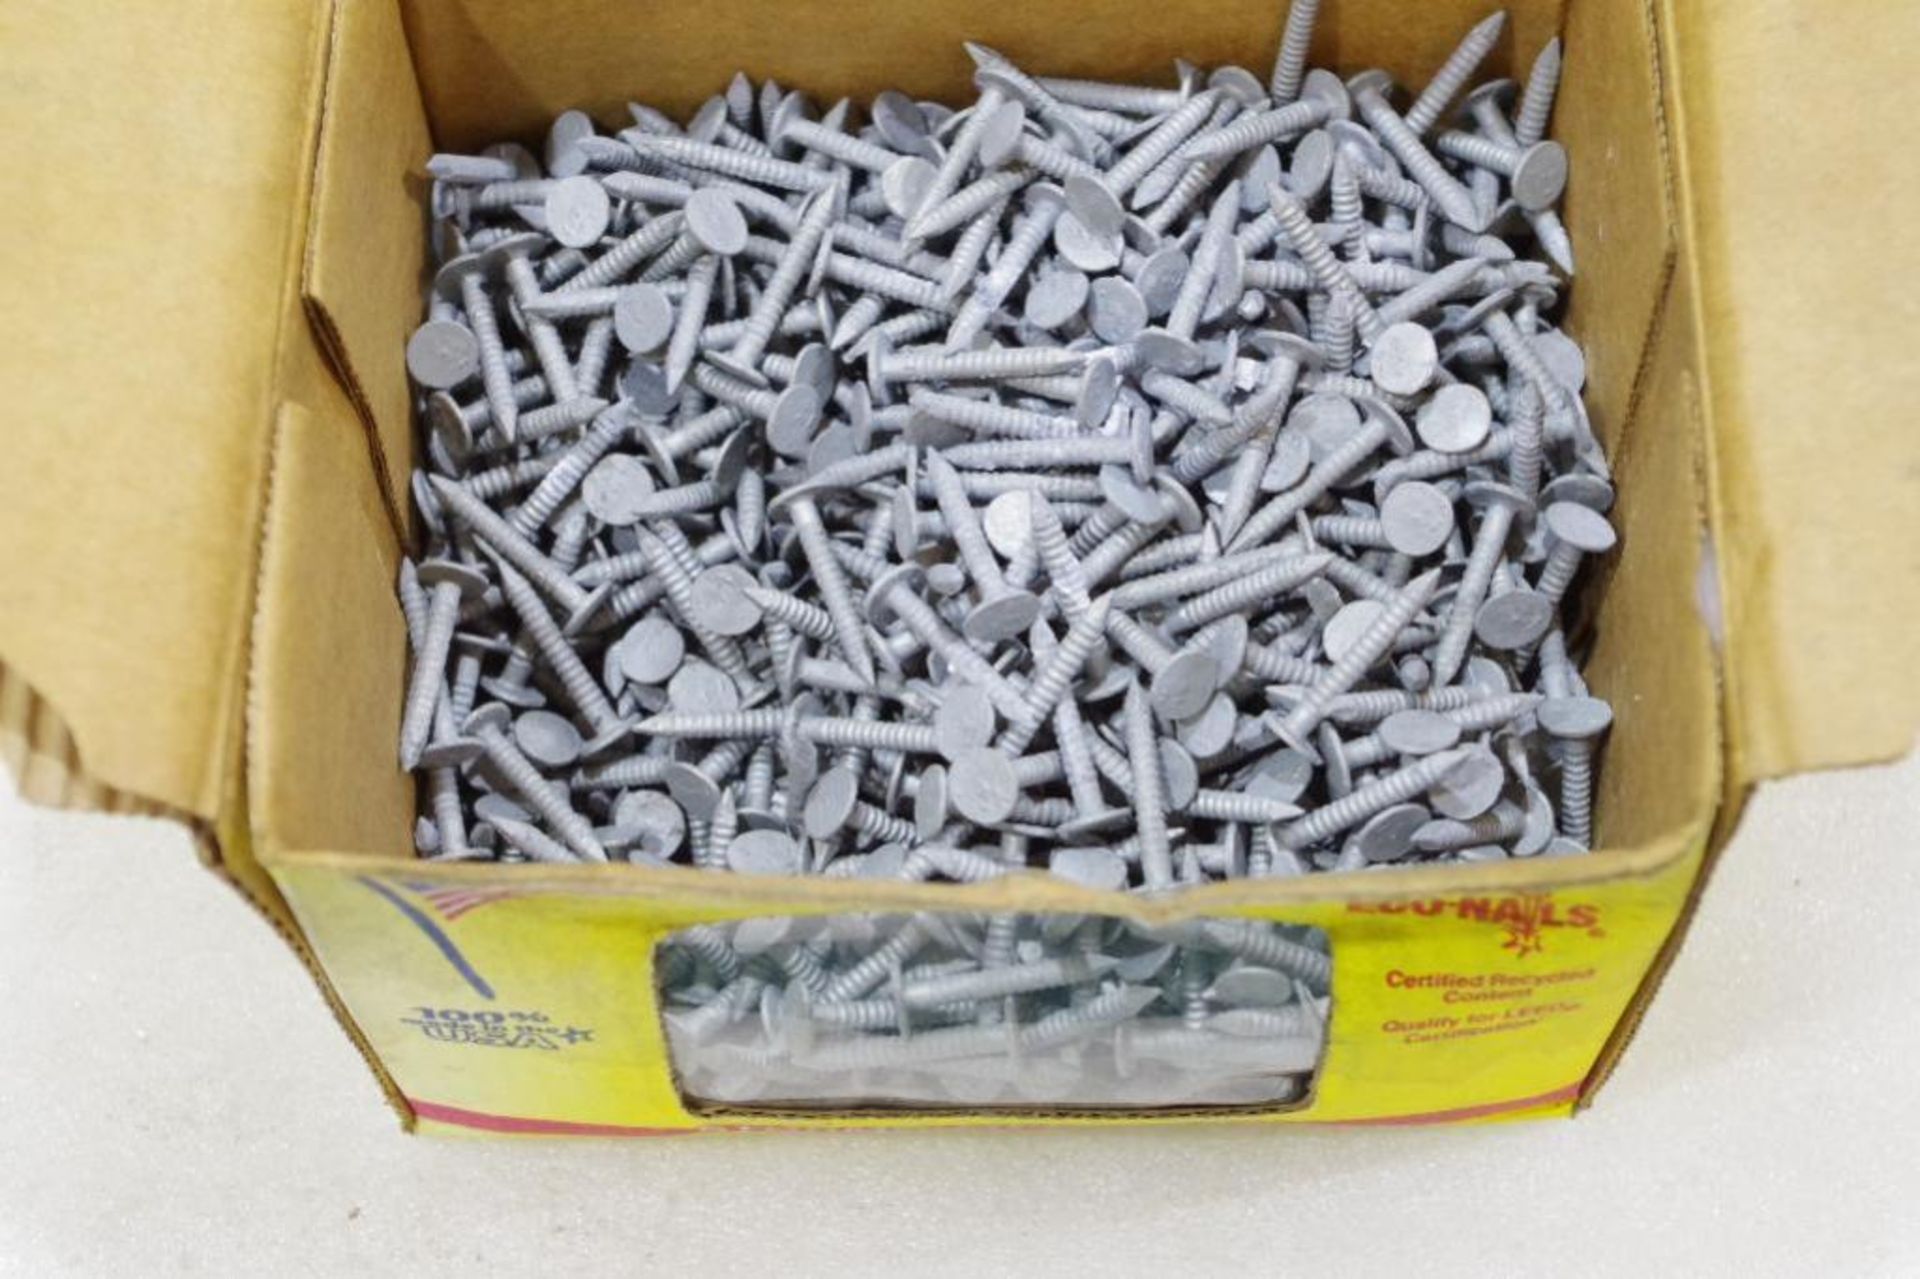 (50) Lbs. MAZE Asphalt and Fiberglass Shingle Nails 1" M/N R-101-A, Made in USA (10 Boxes of 5 Lbs.) - Image 2 of 4